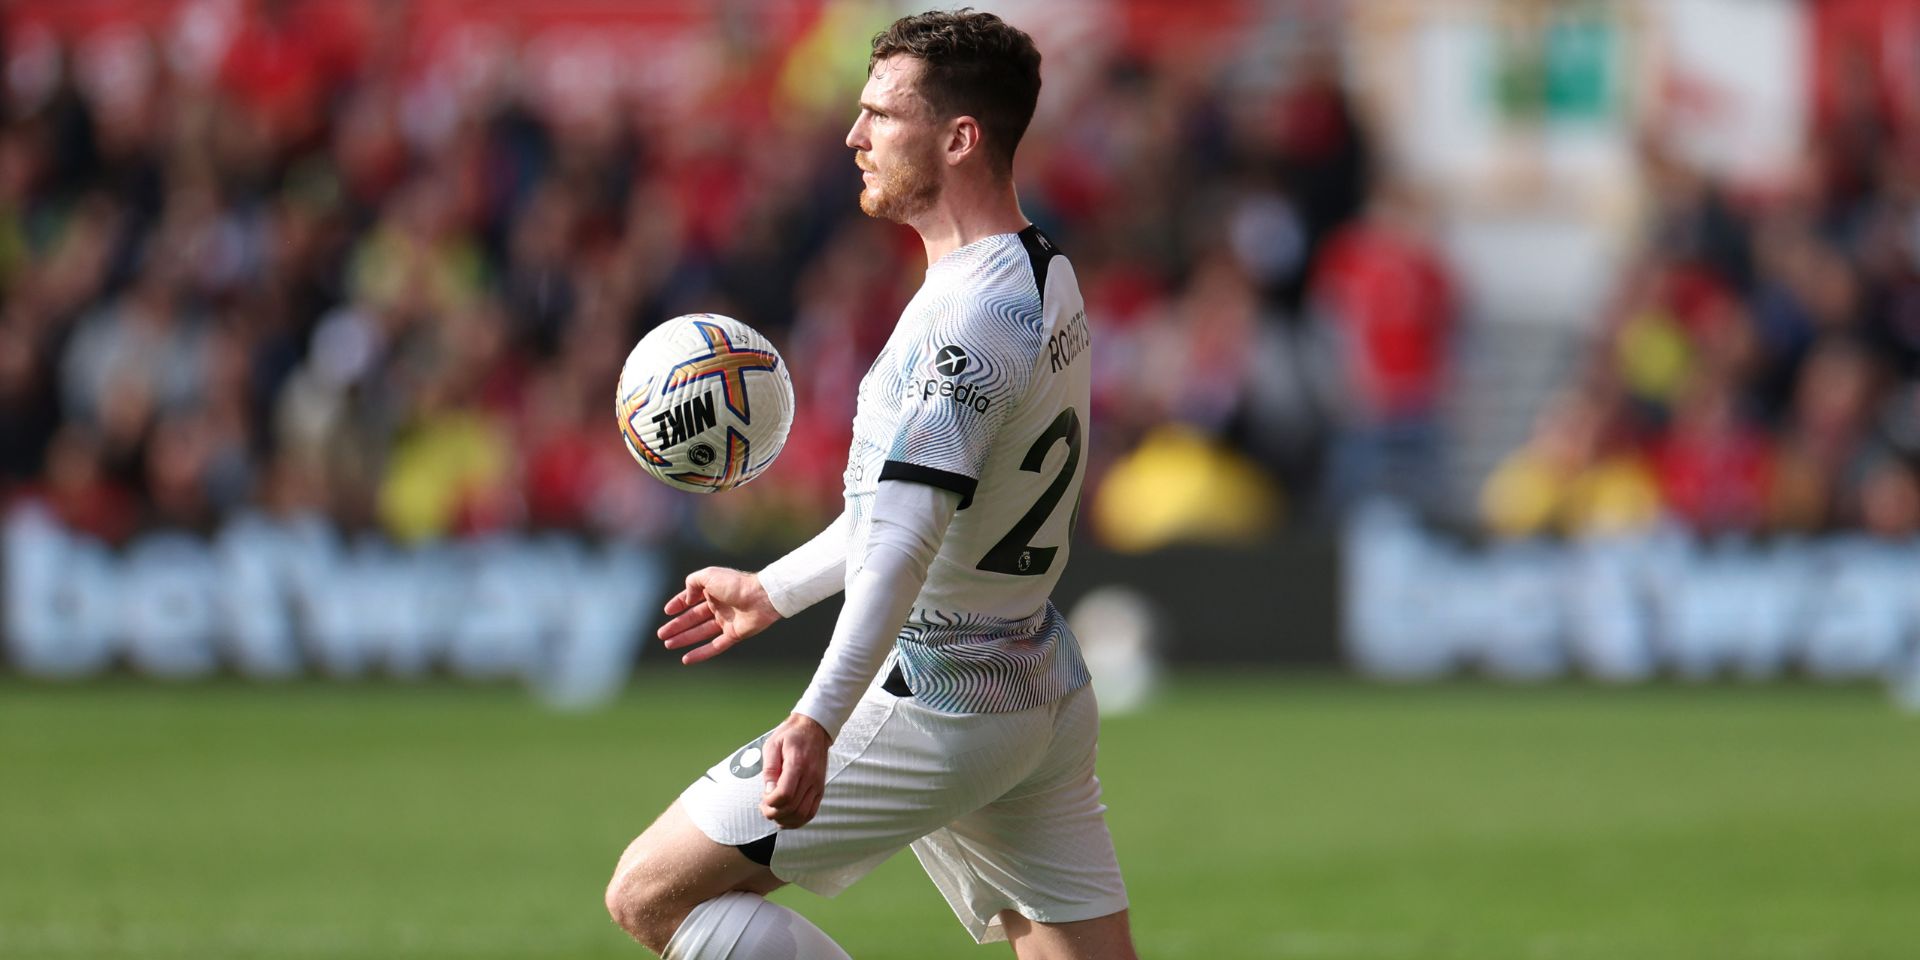 Robertson on what is ‘so hard to say to the fans’ after he leaves Forest ‘frustrated’